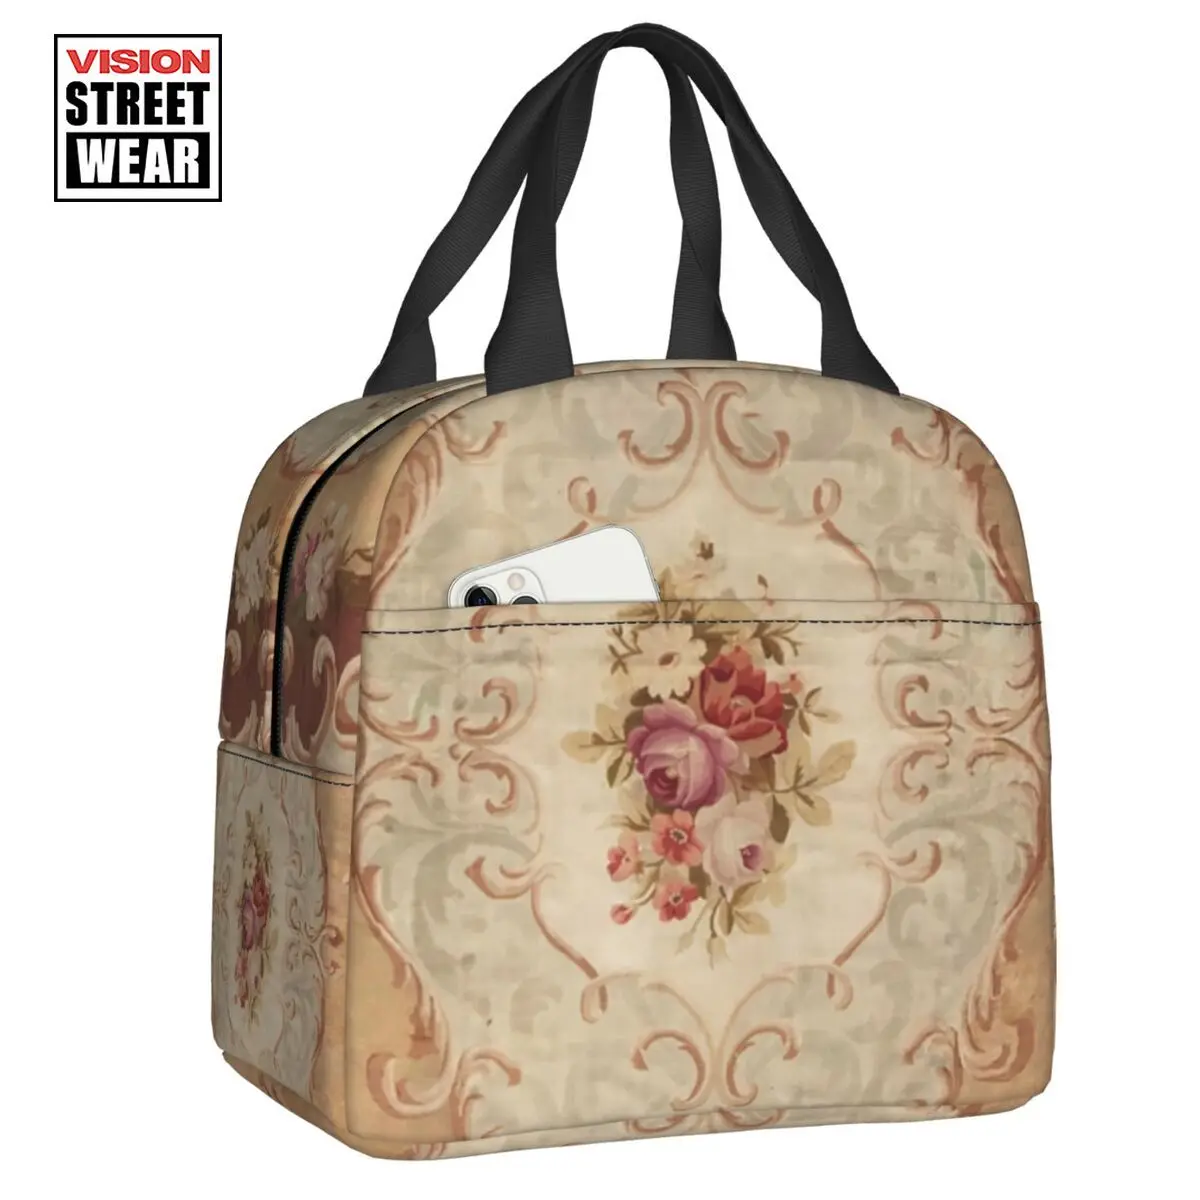 

Antique Rose Floral French Aubusson Rug Print Insulated Lunch Bags Work School Portable Thermal Cooler Lunch Box Women Children